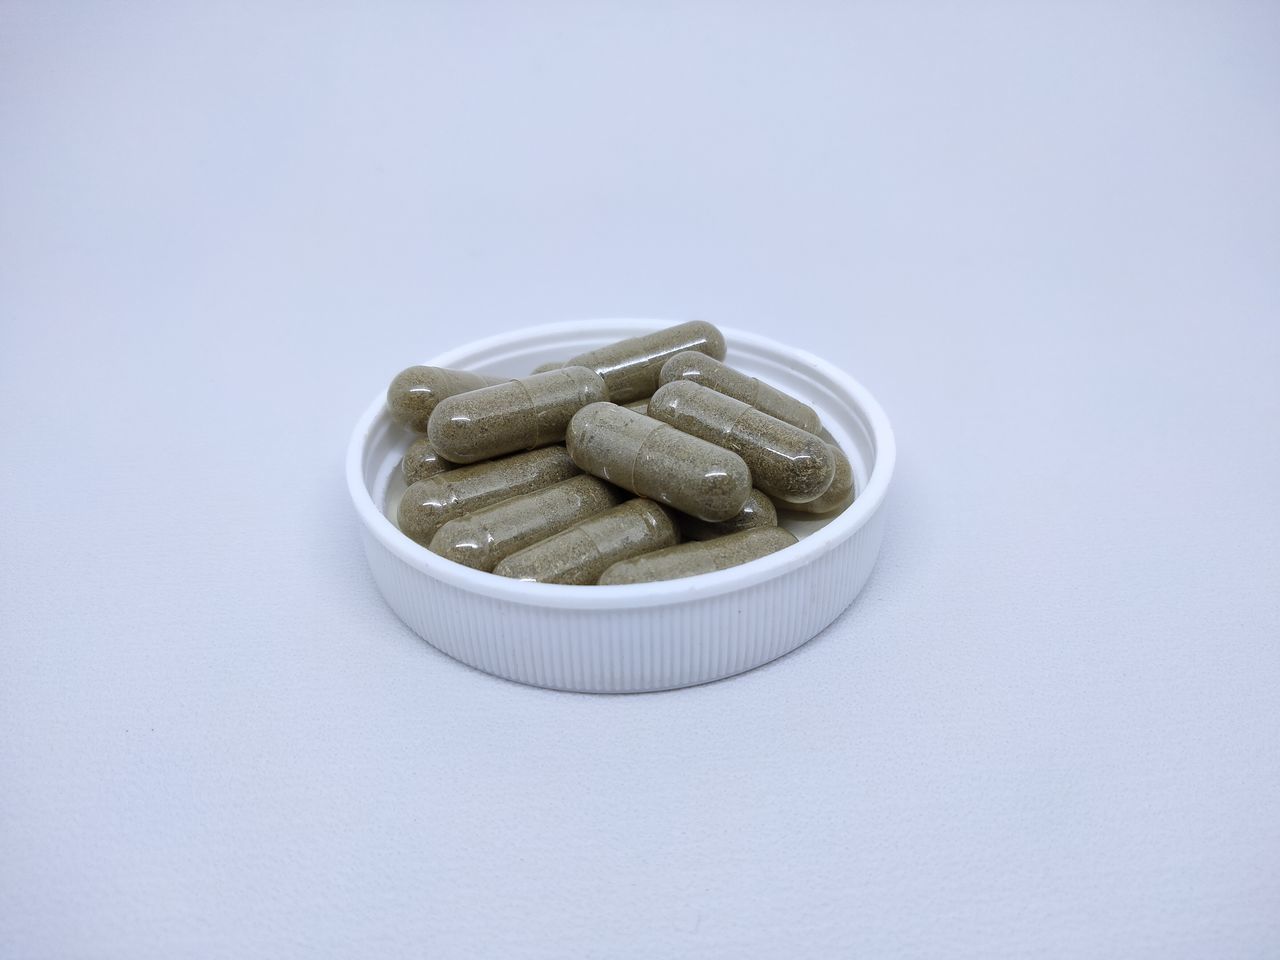 pill, dose, pharmaceutical drug, studio shot, medicine, healthcare and medicine, indoors, capsule, drug, nutritional supplement, no people, food, large group of objects, food and drink, still life, white background, copy space, vitamin, social issues, close-up, container